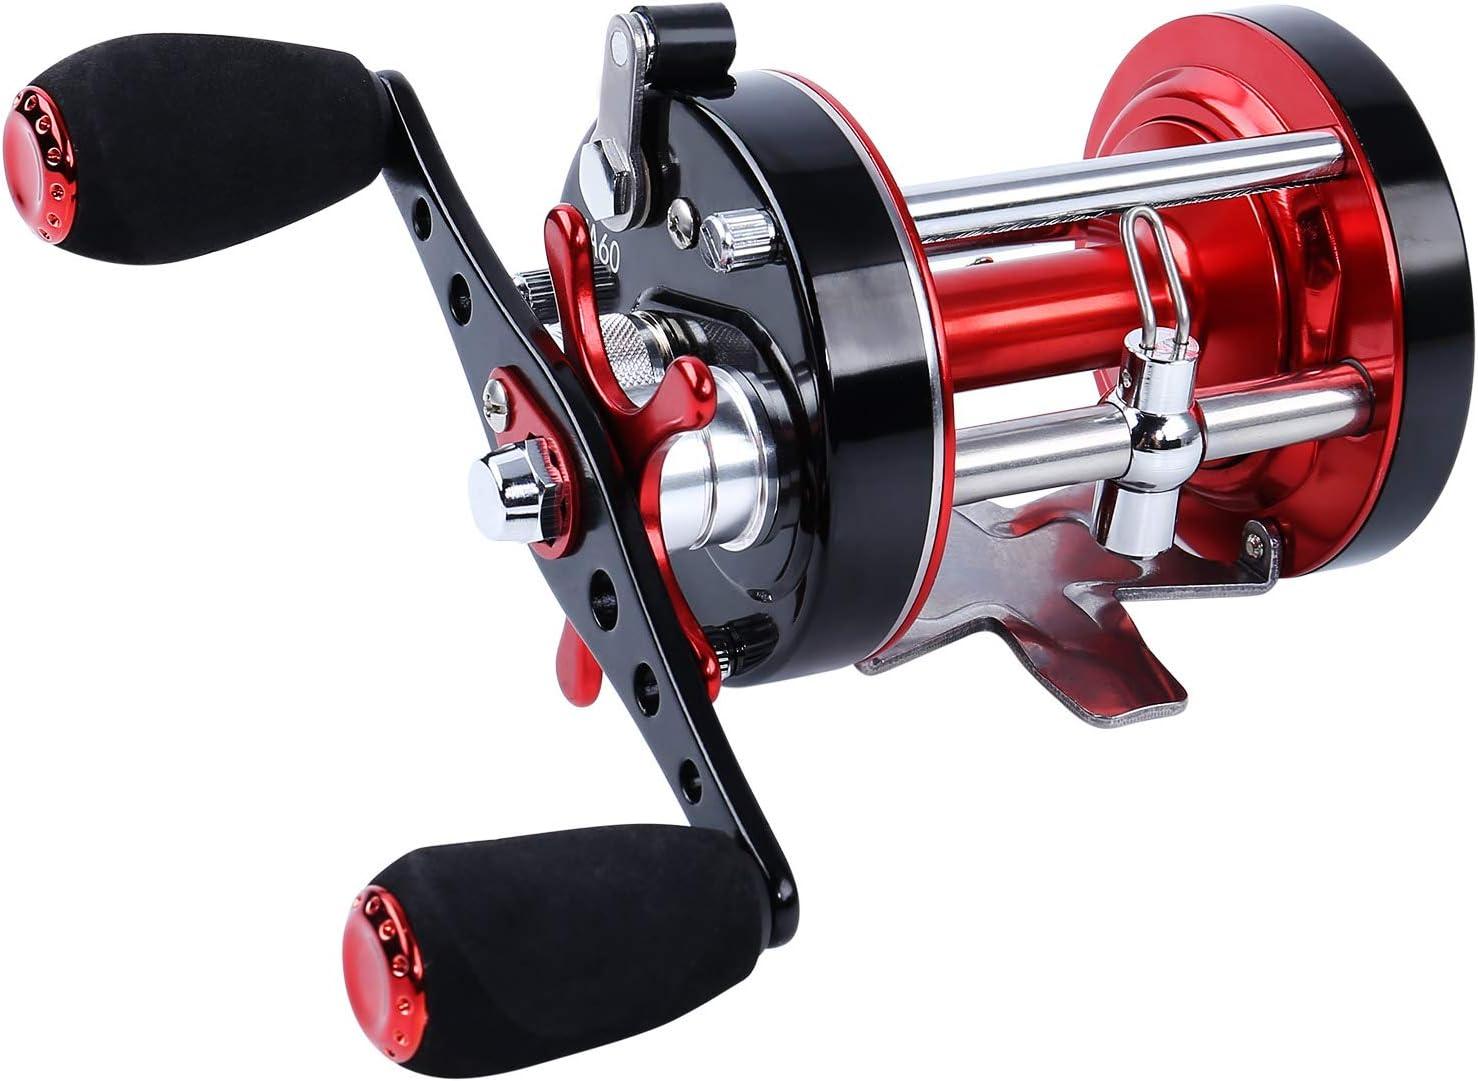 SOUGAYILANG Fishing Reels Right Hand Round Baitcasting Reel 6+1BB  Conventional Reel Reinforced Metal Body Supreme Star Drag